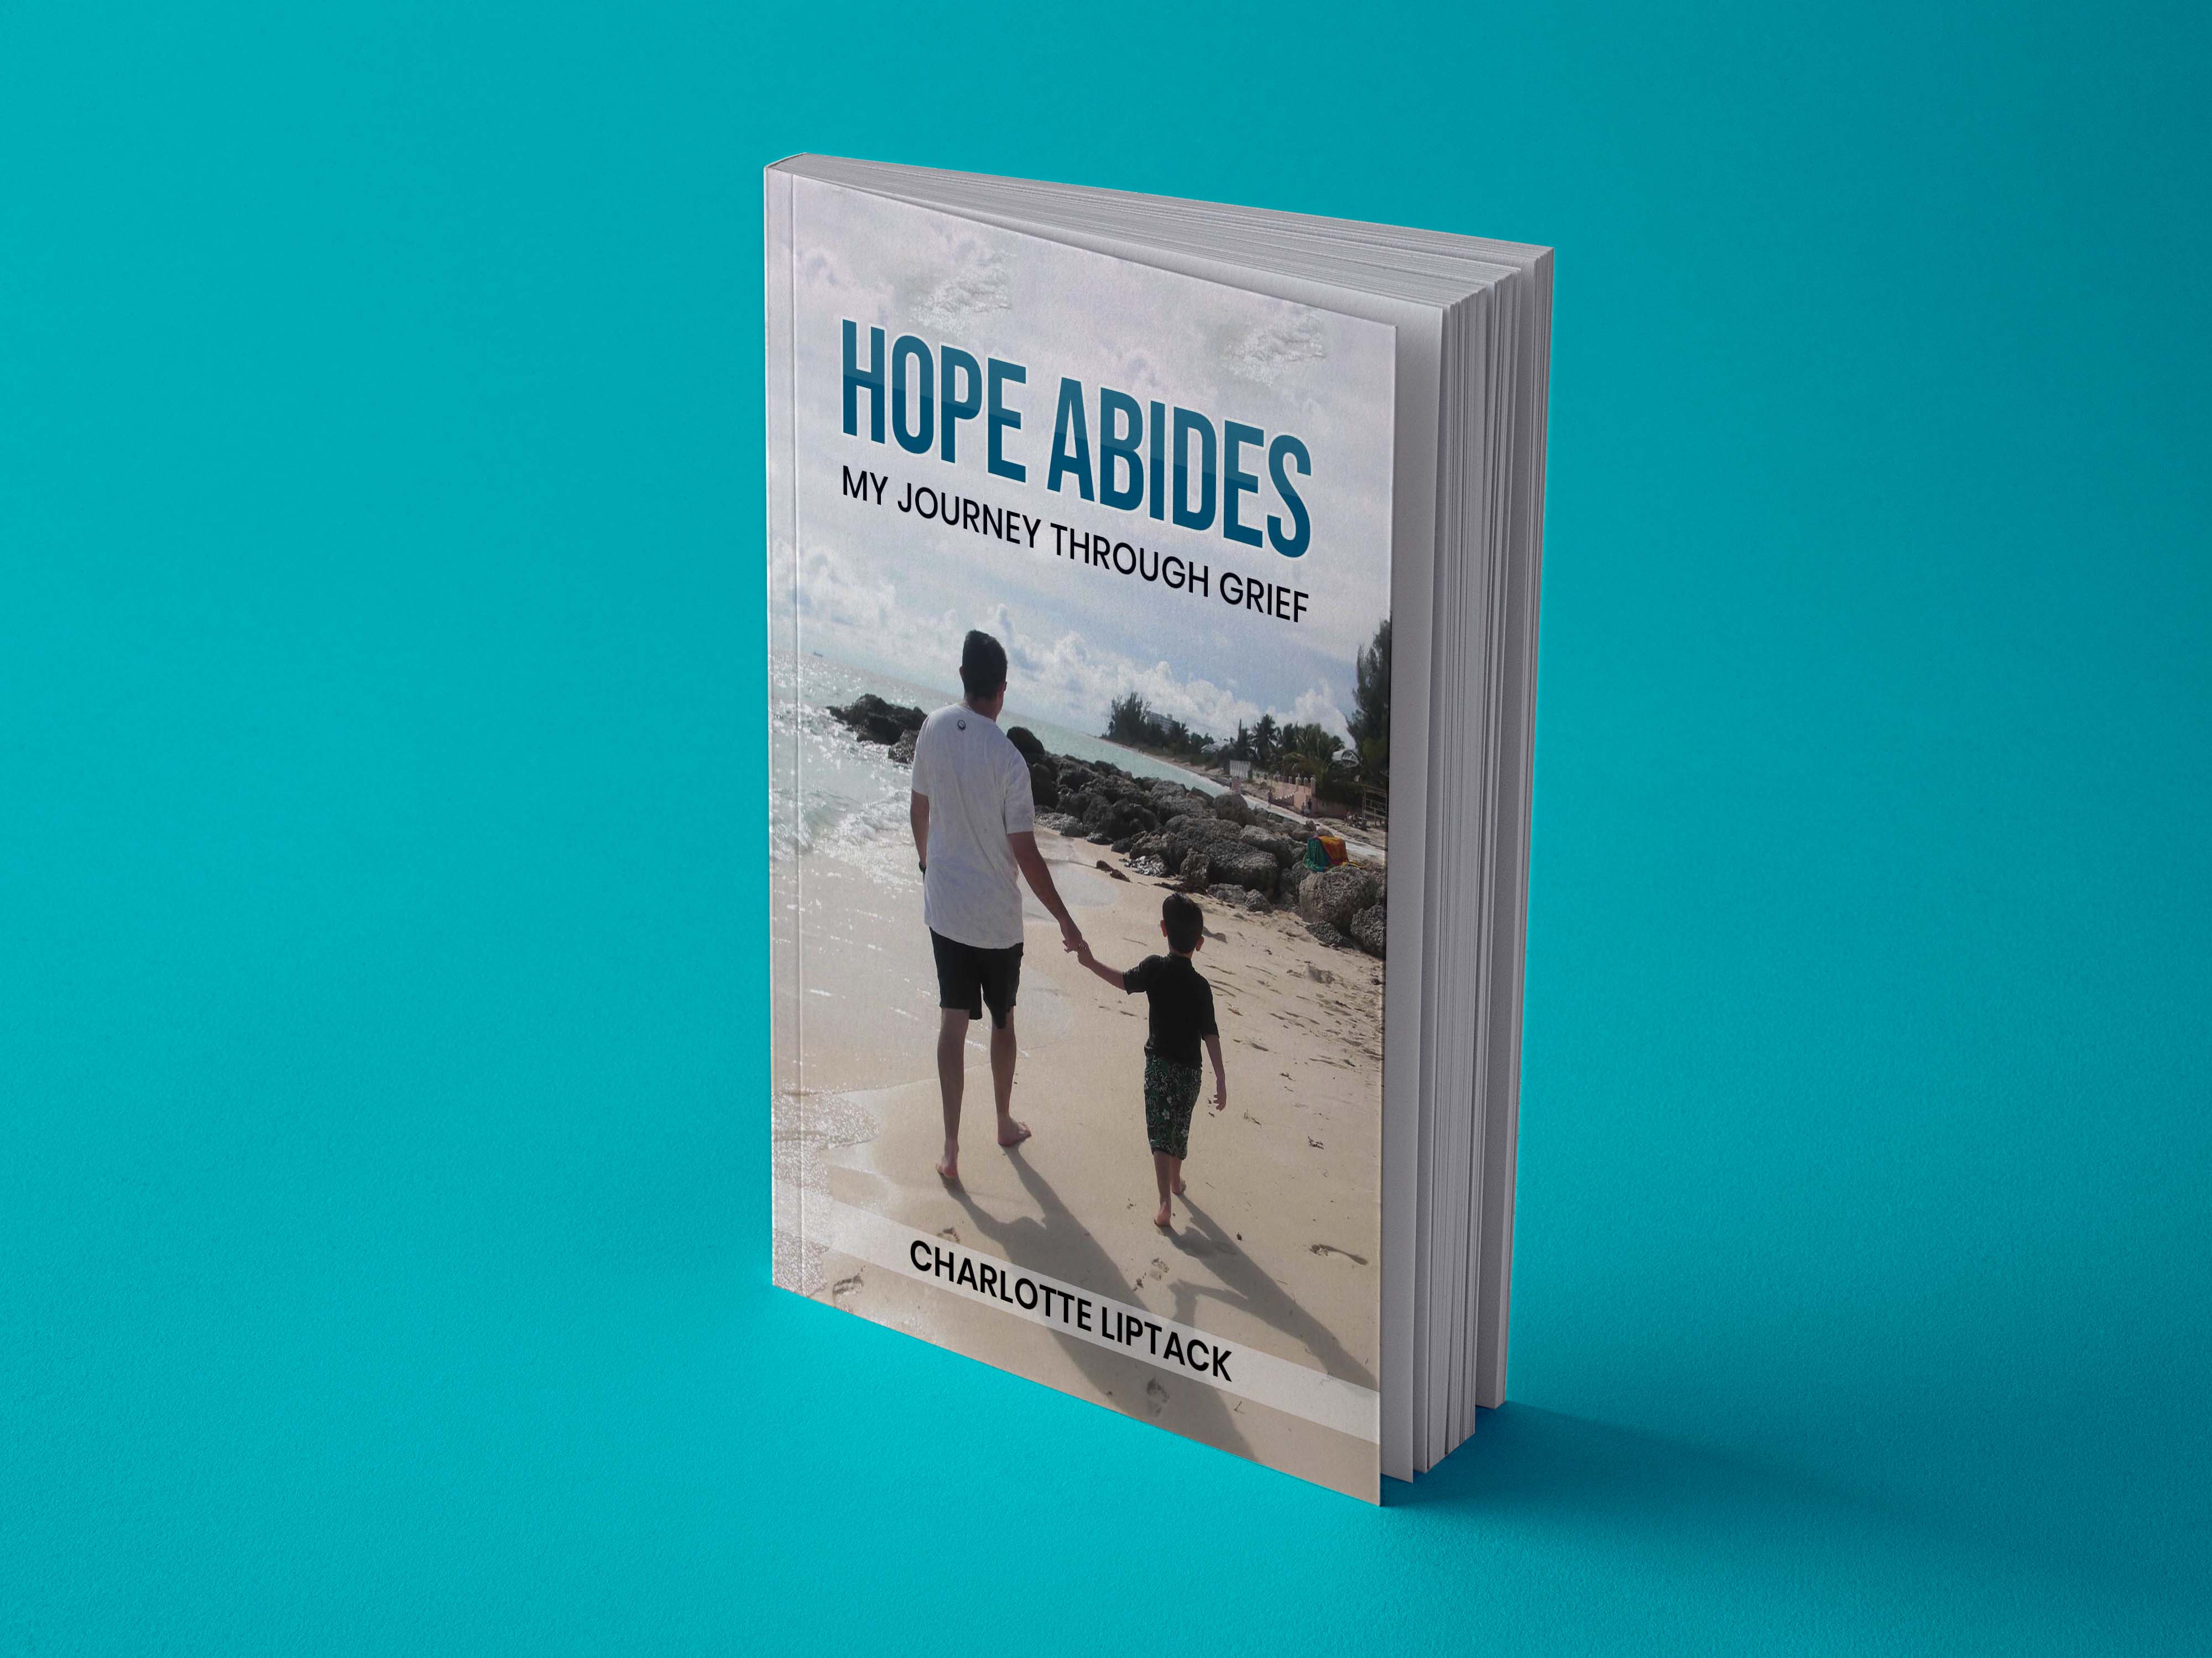 Charlotte Liptack shares her Life Tragedy Survival Story in her new book "Hope Abides: My Journey Through Grief"